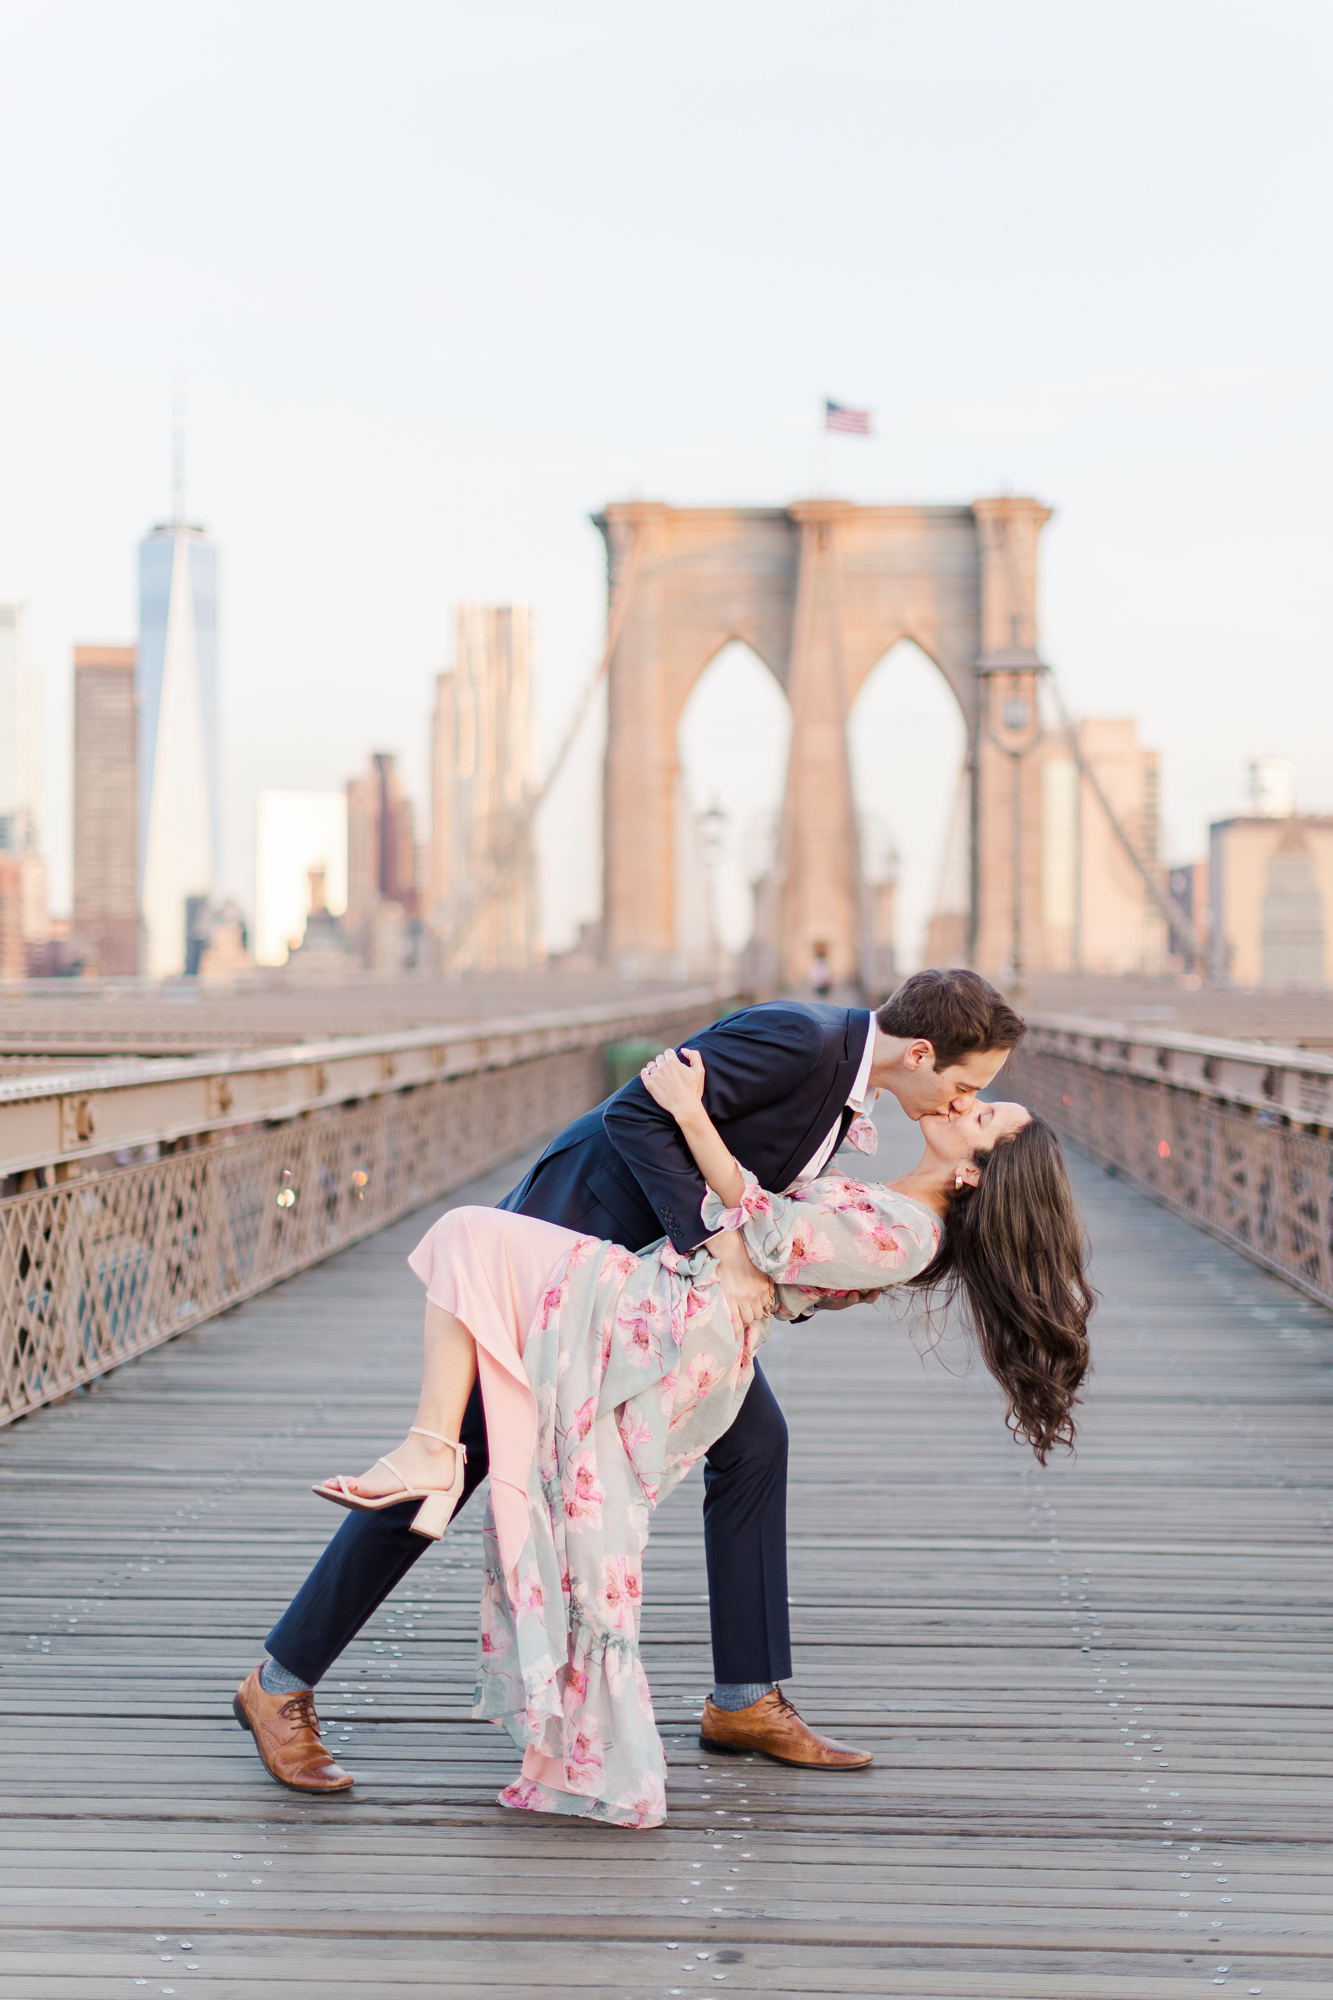 Awesome Engagement Shoot in DUMBO